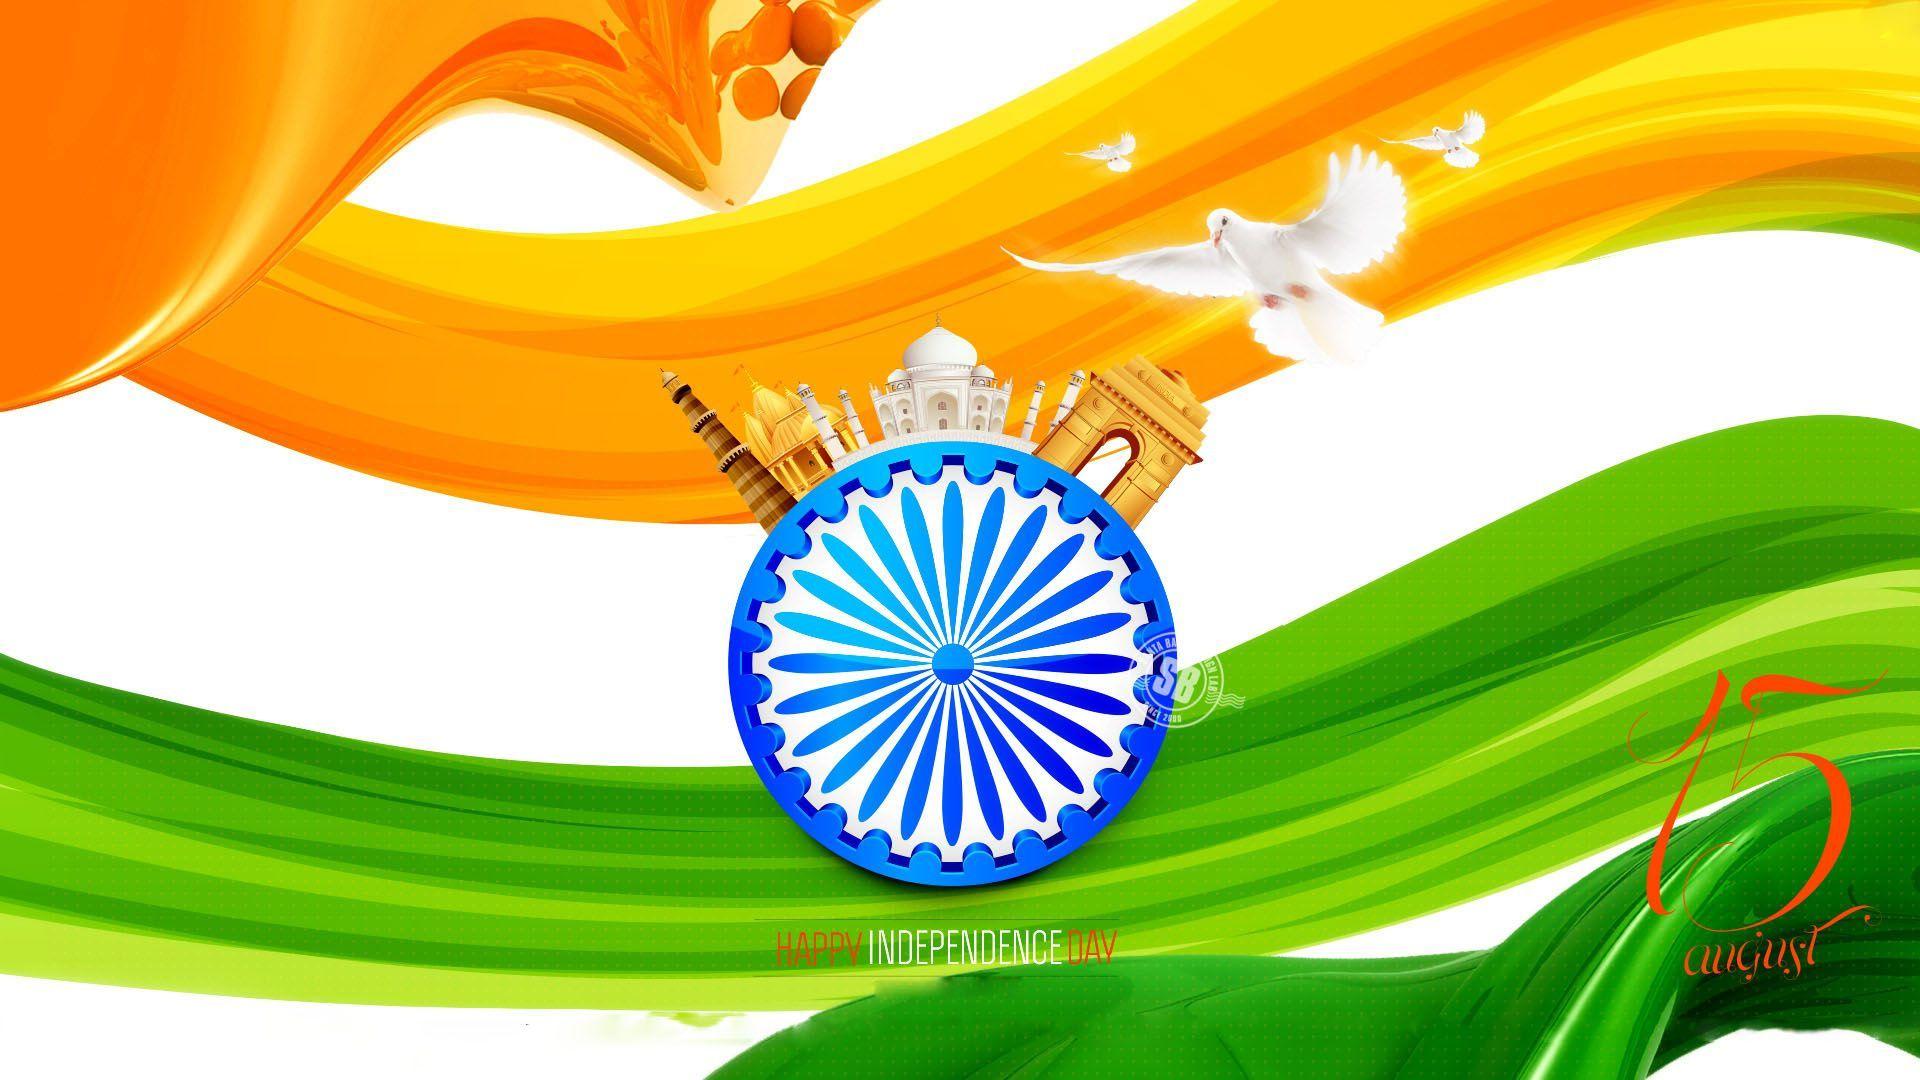 15 August Wallpaper and Images Free Download Independence Day Wallpapers